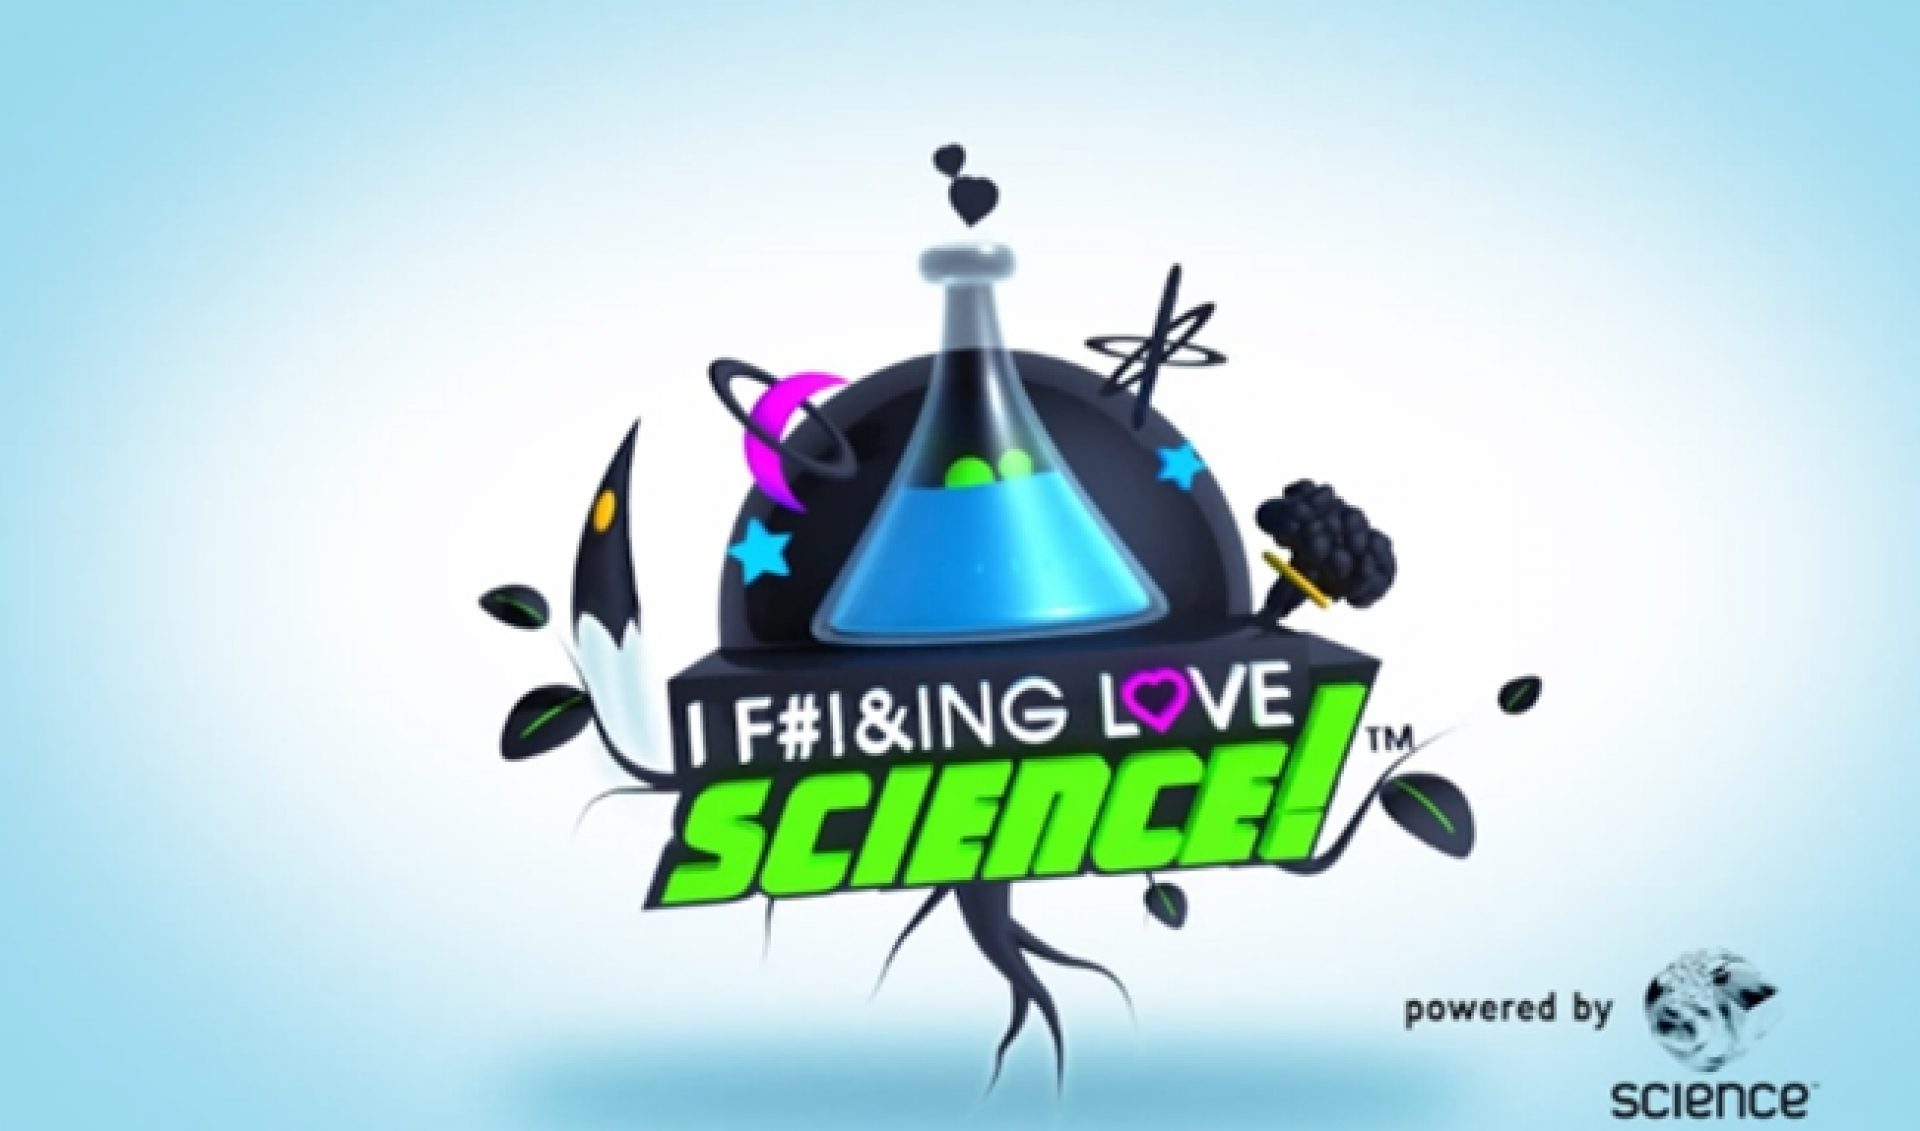 New Revision3 Series Declares ‘I F**king Love Science’